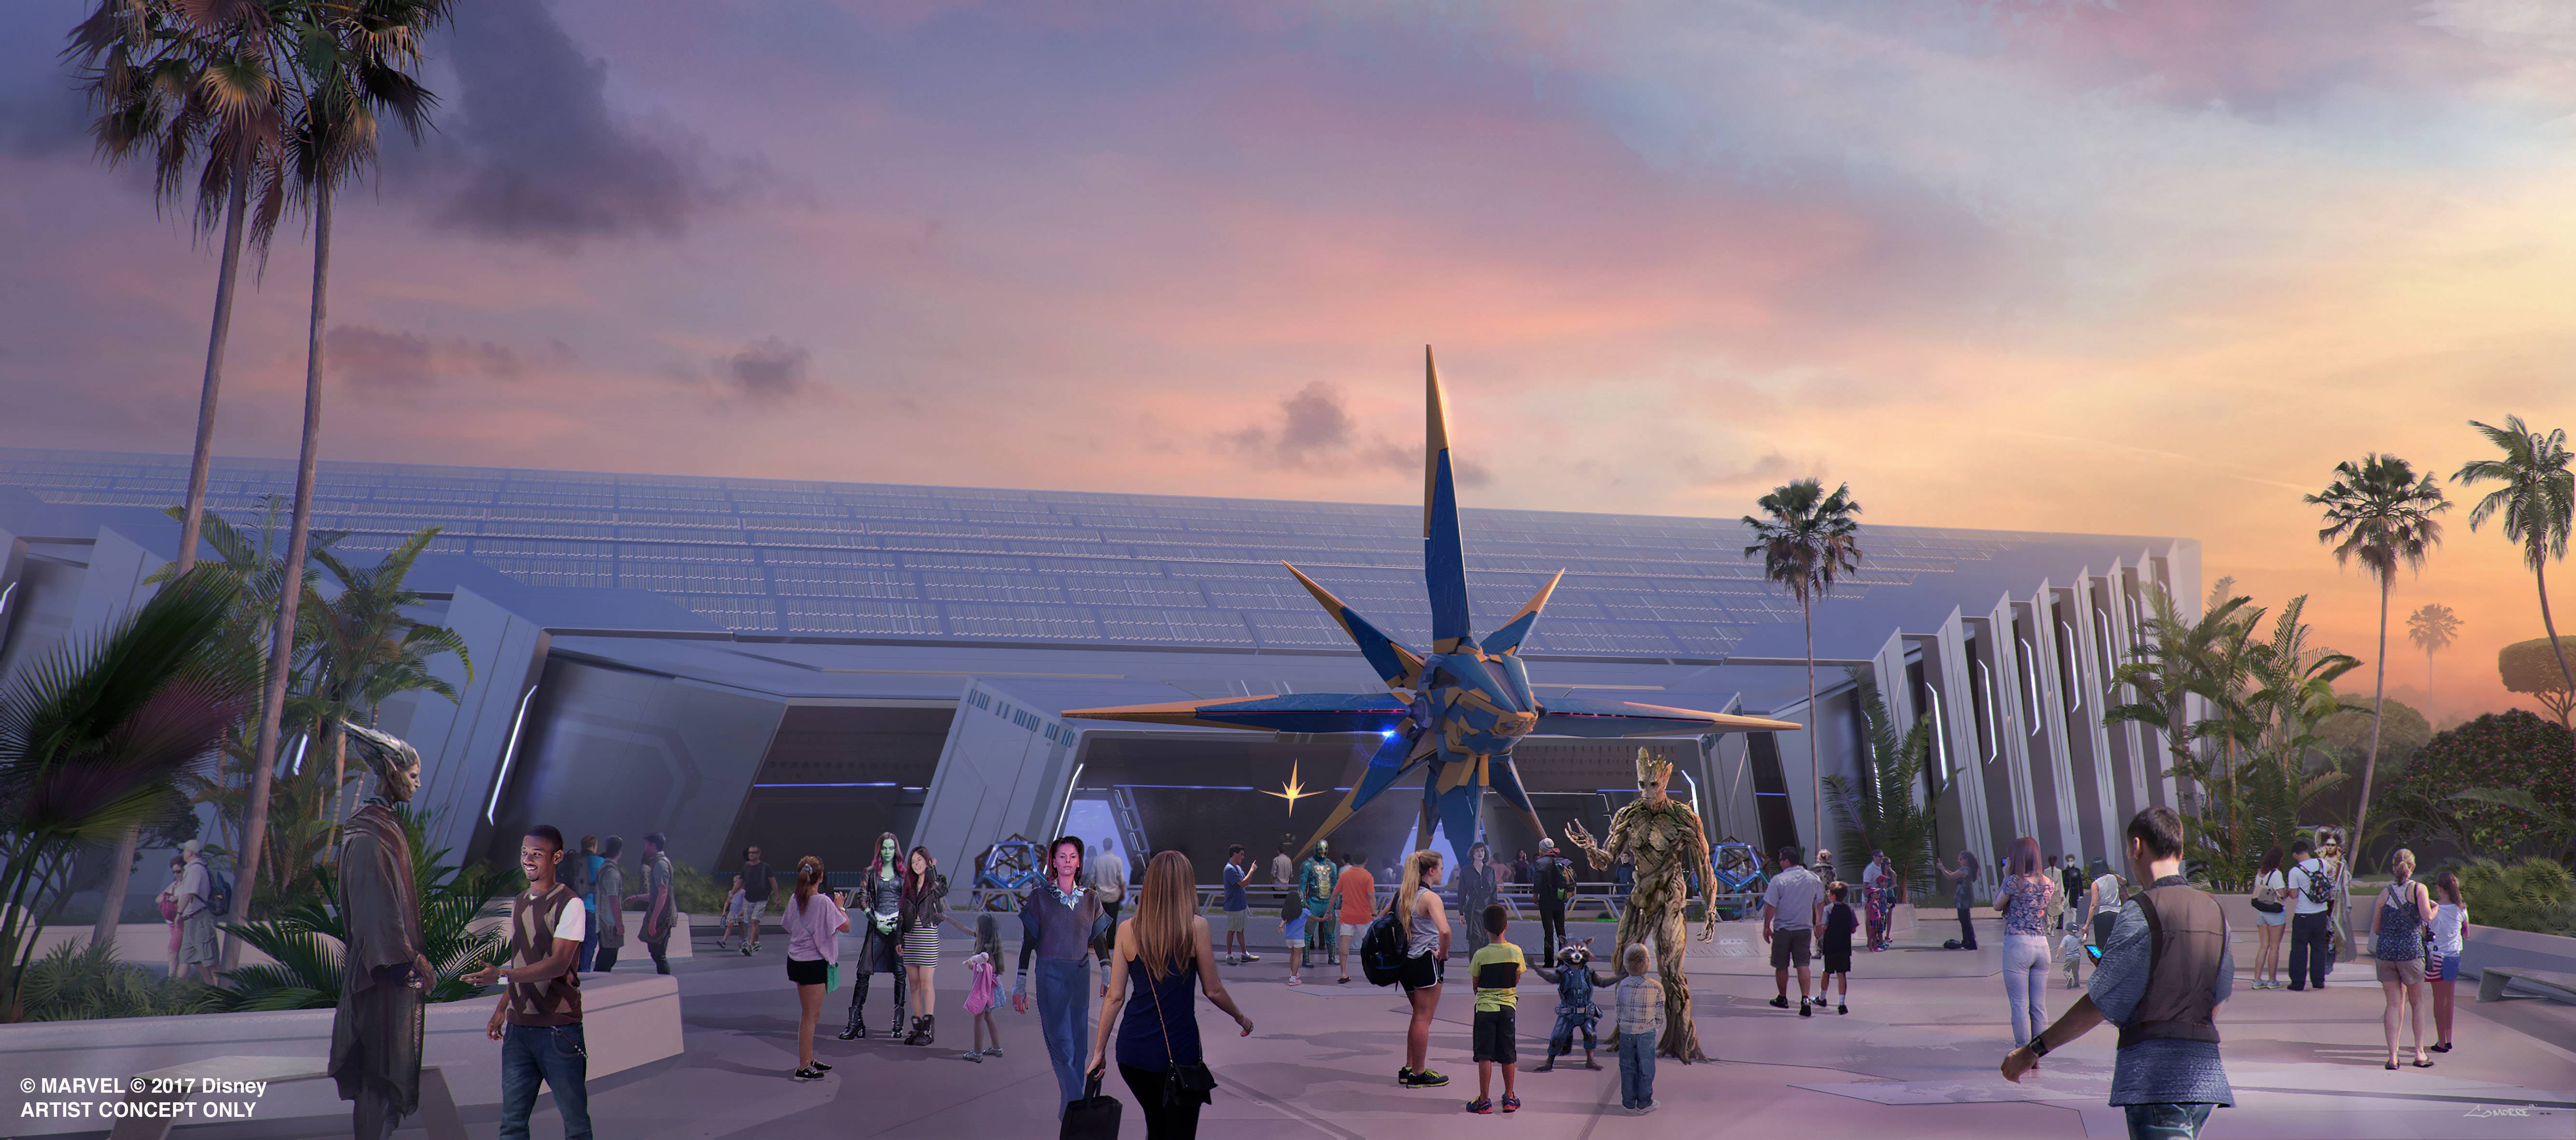 Guardians of the Galaxy attraction is coming to Epcot in Spring 2021